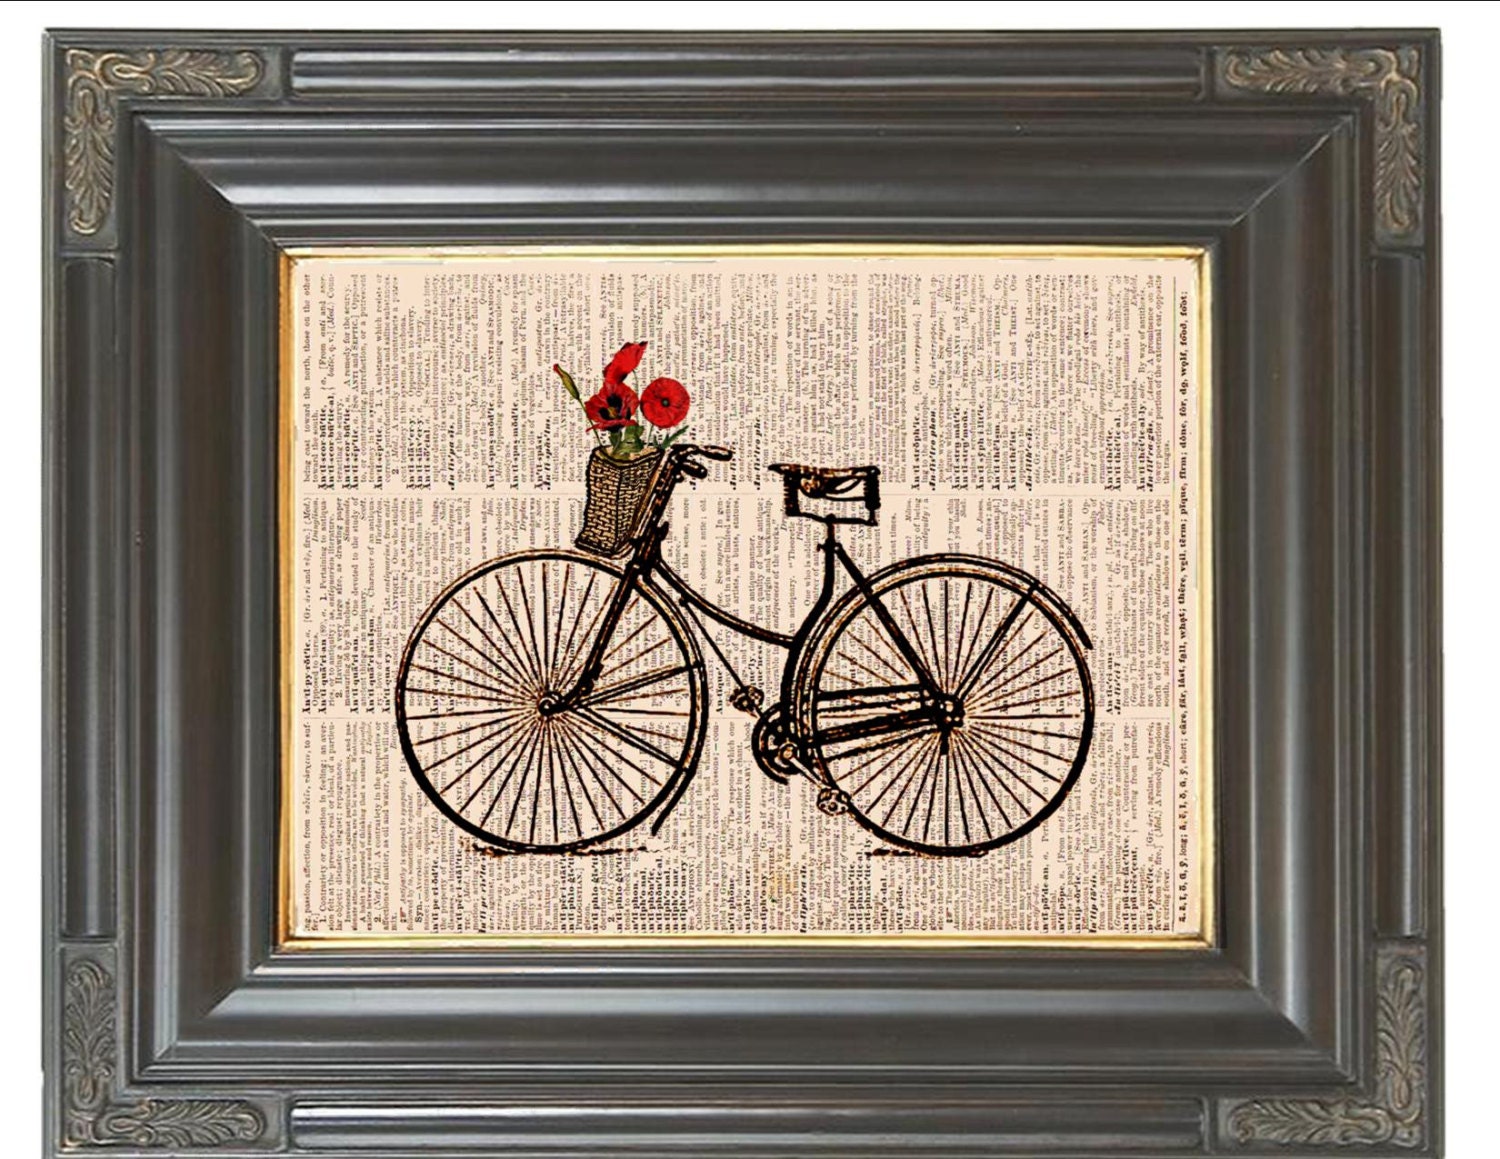 Paris Bicycle wall art print on dictionary or music page